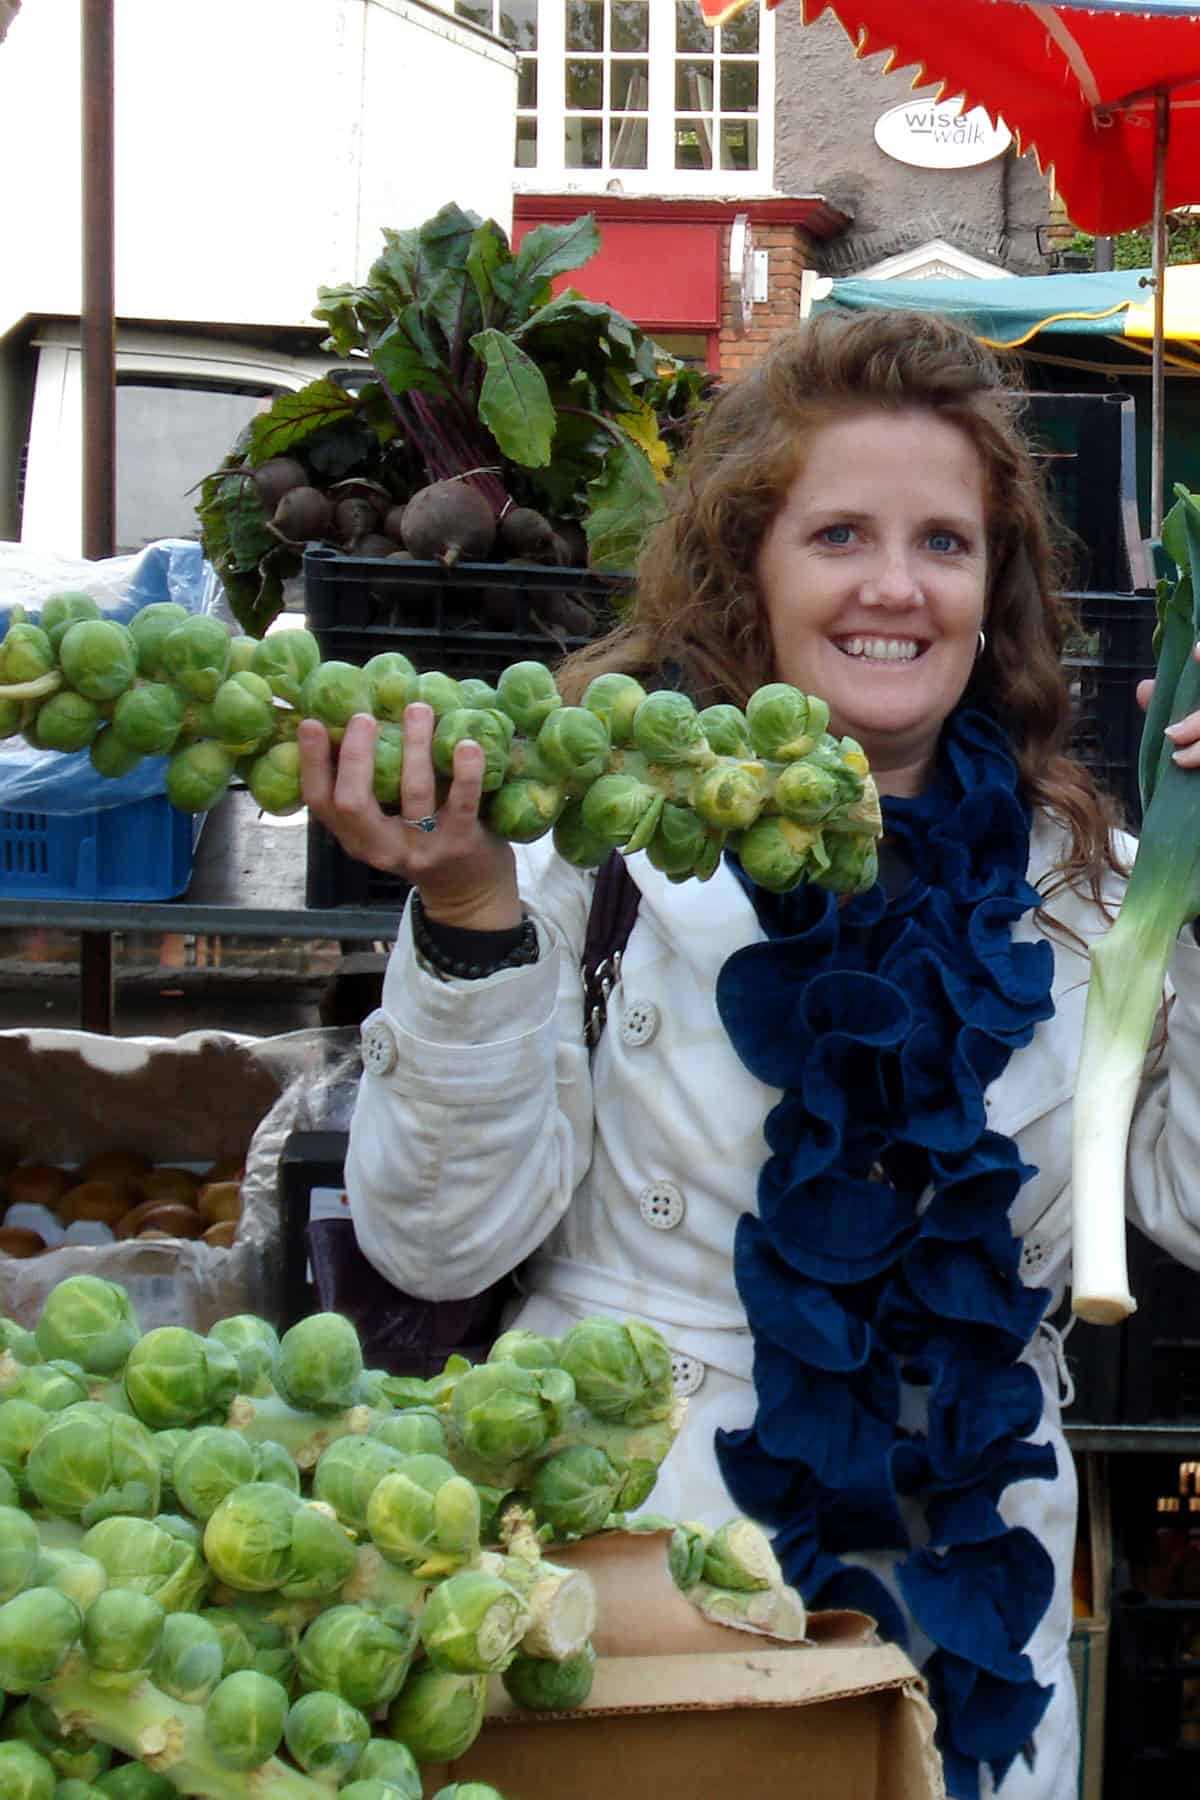 woman holding stalk of Brussels sprouts in market.